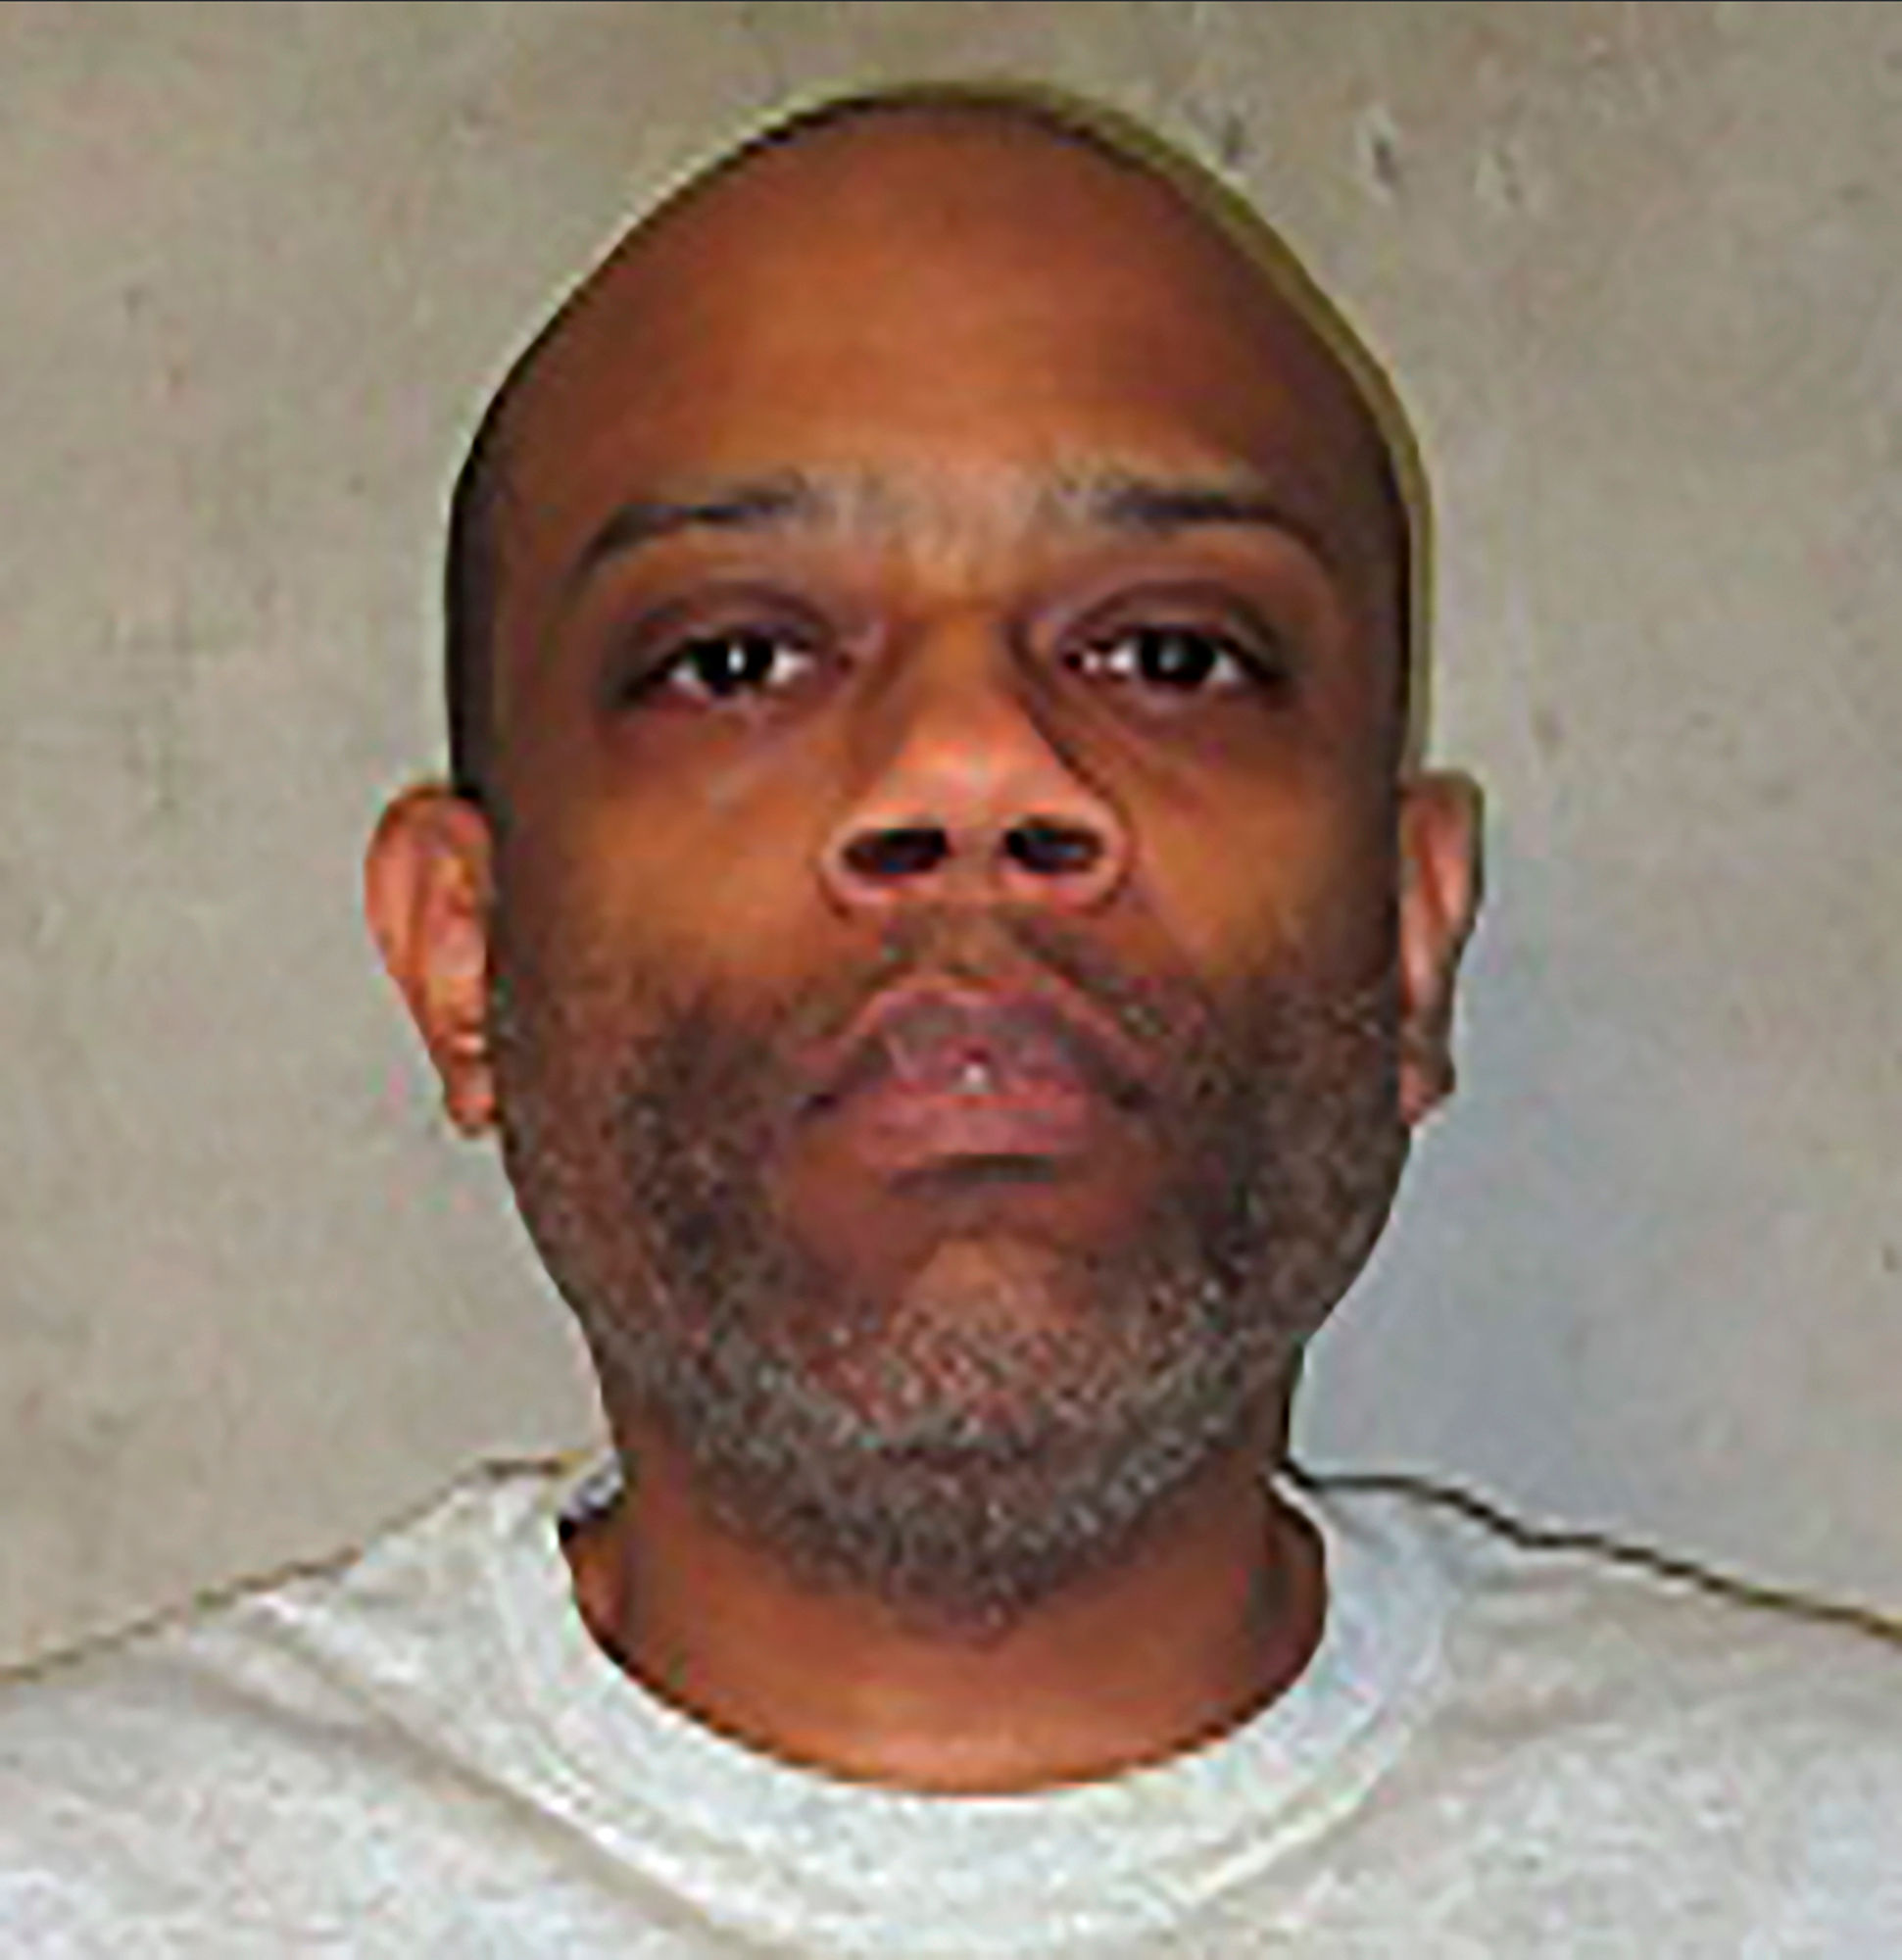 Oklahoma executes Donald Grant for 2001 slayings of 2 hotel workers during robbery